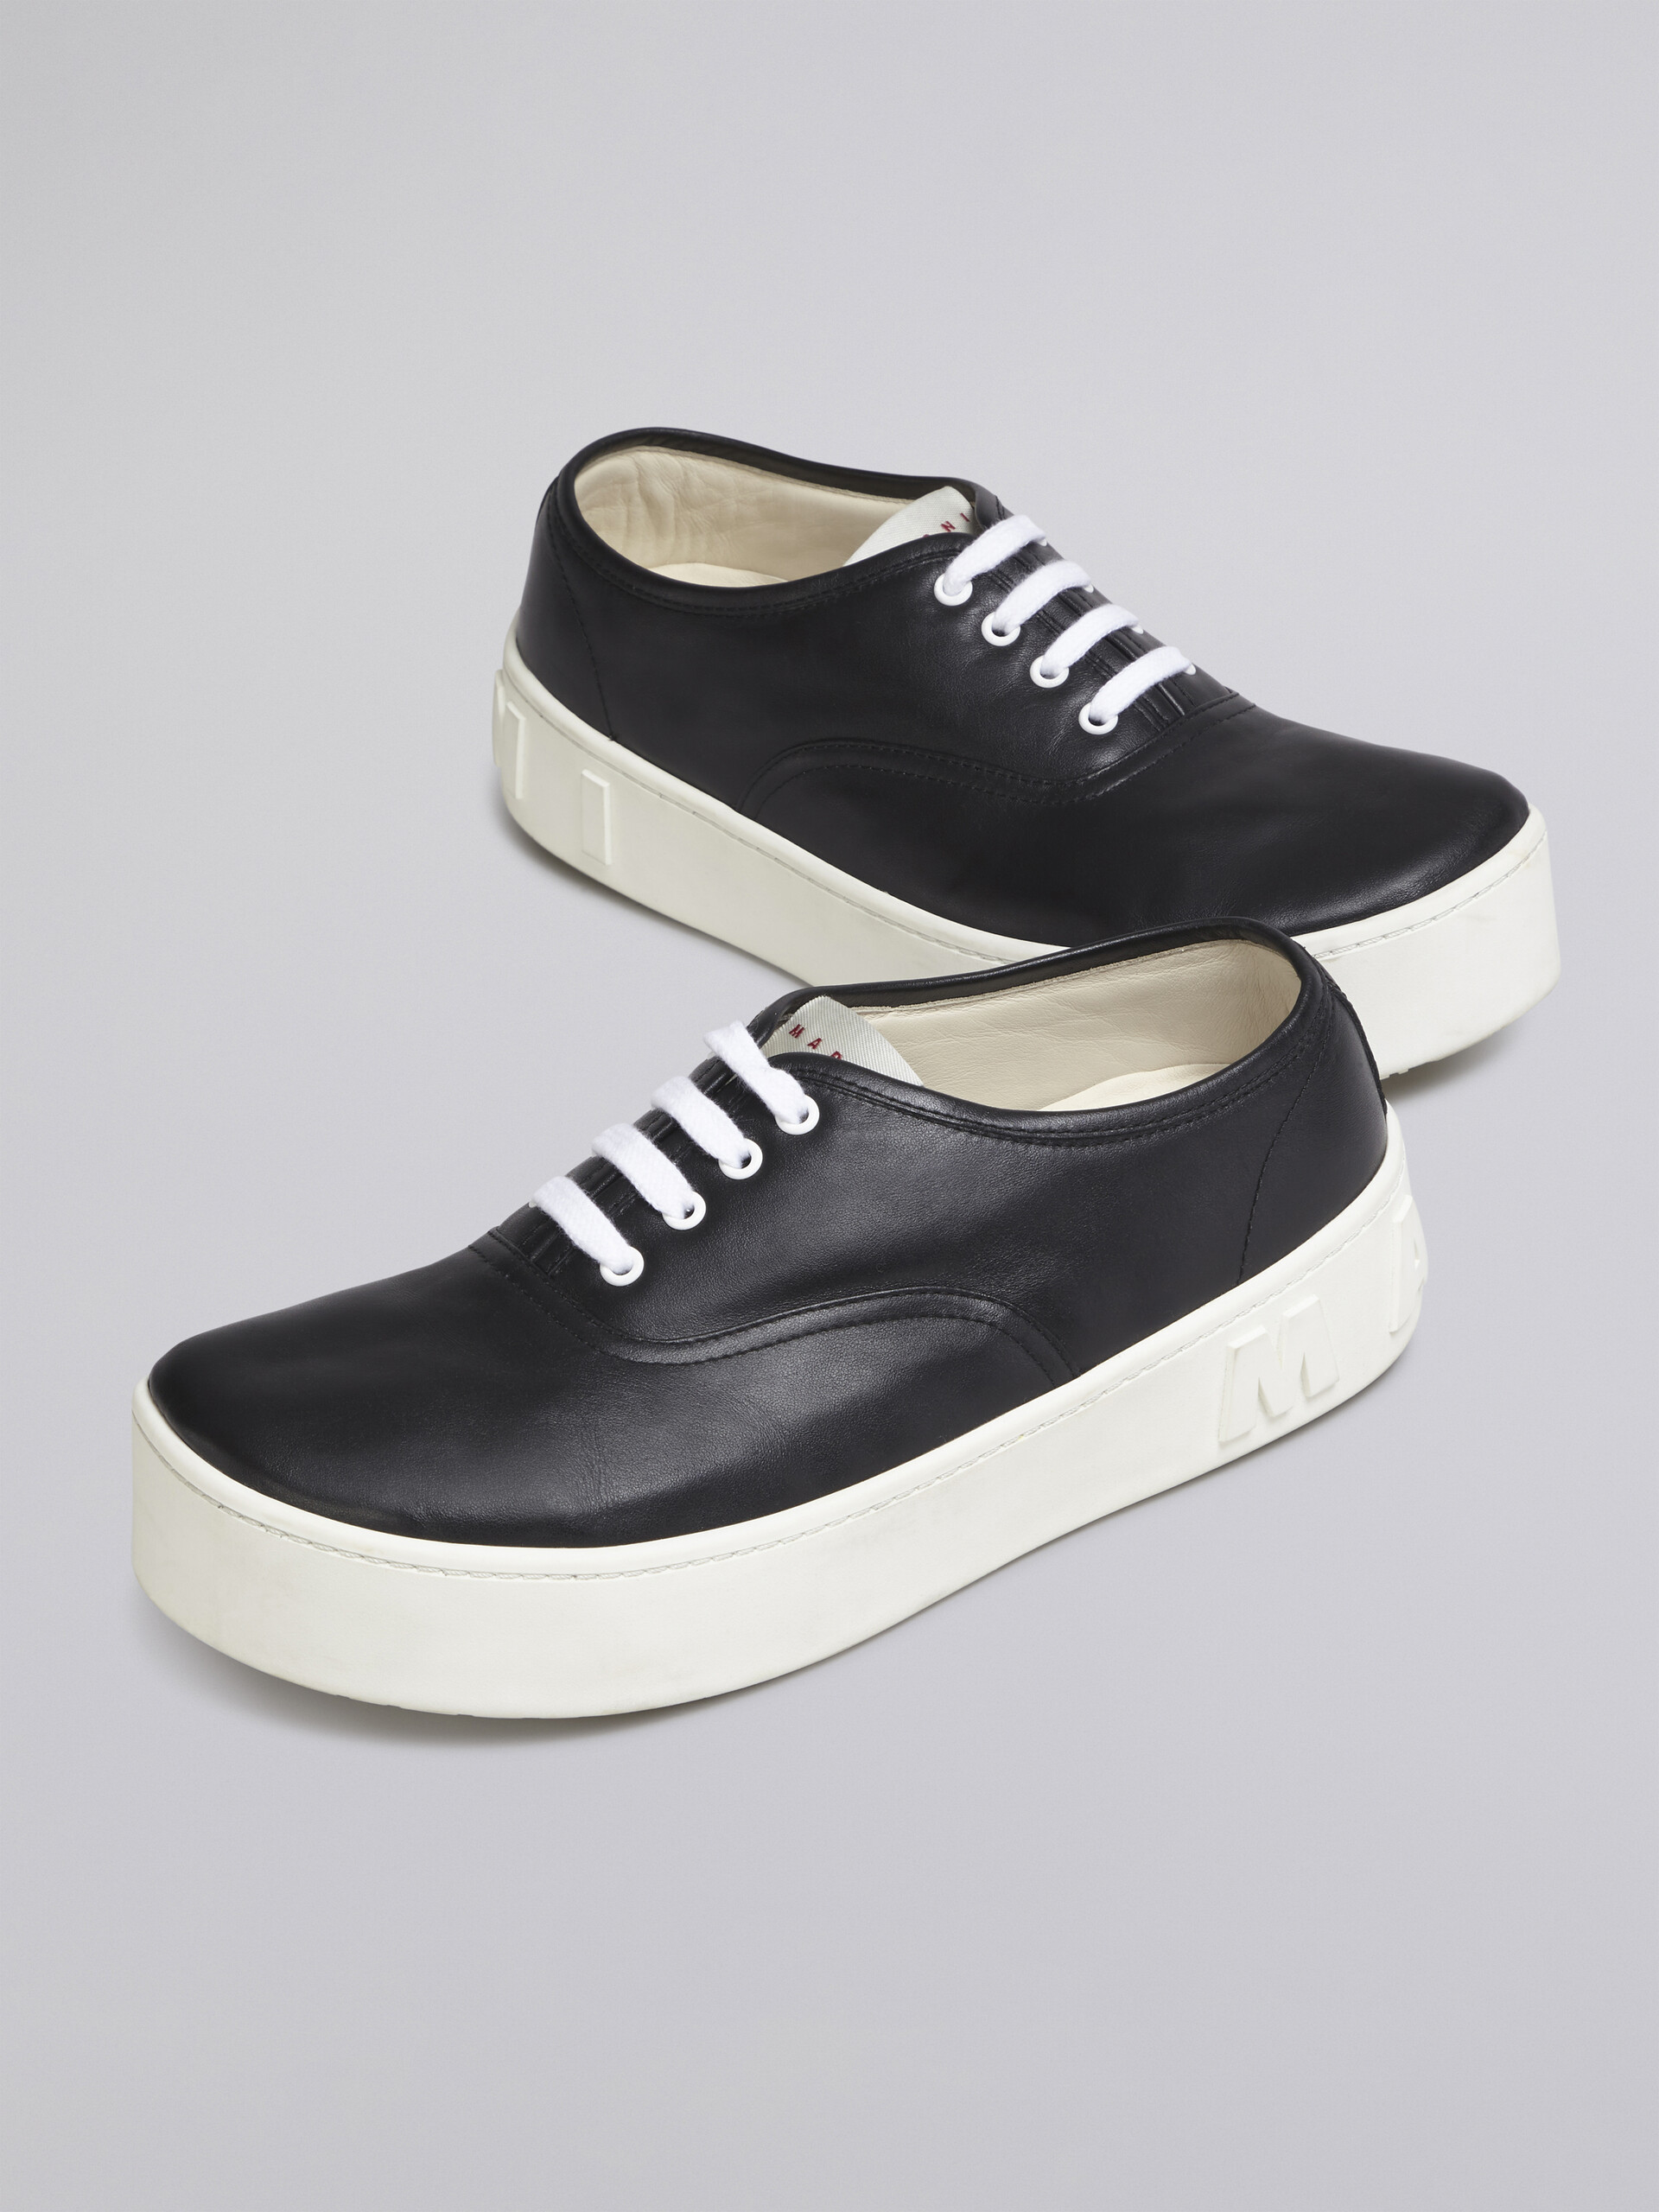 Black leather sneaker with maxi logo - Sneakers - Image 5